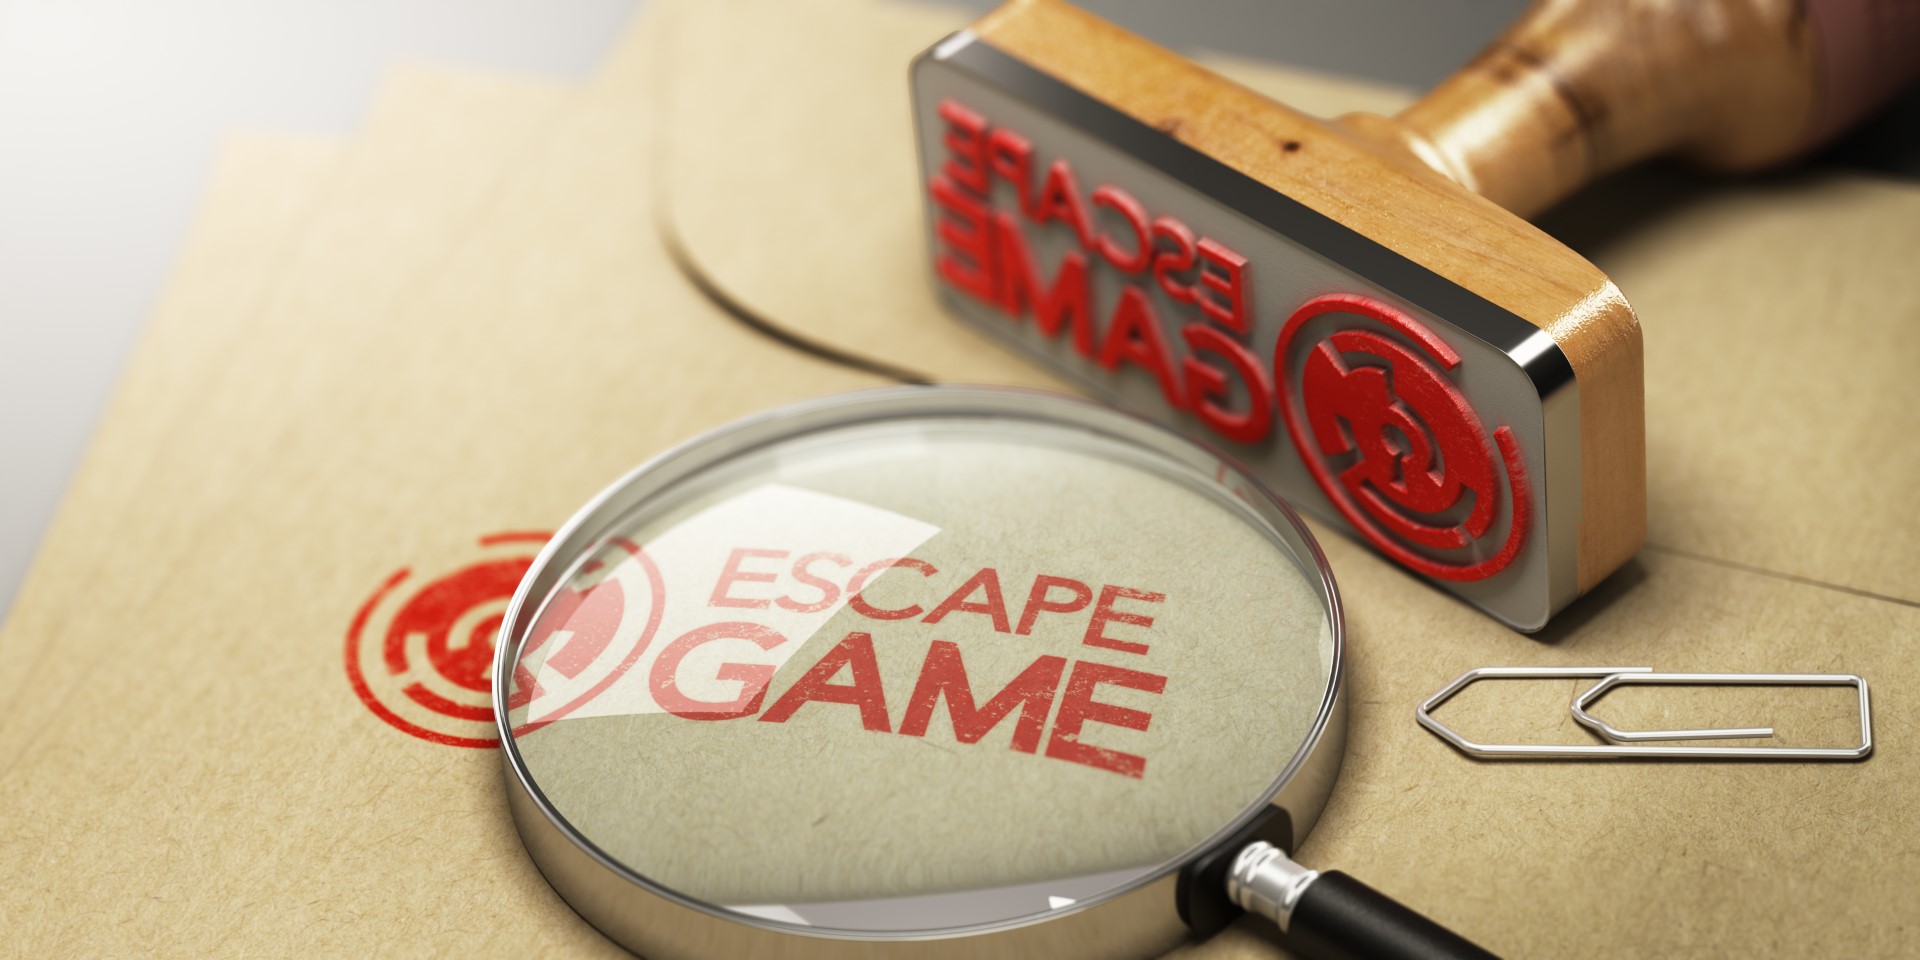 Escape room theme ‘kidnapped by a man’